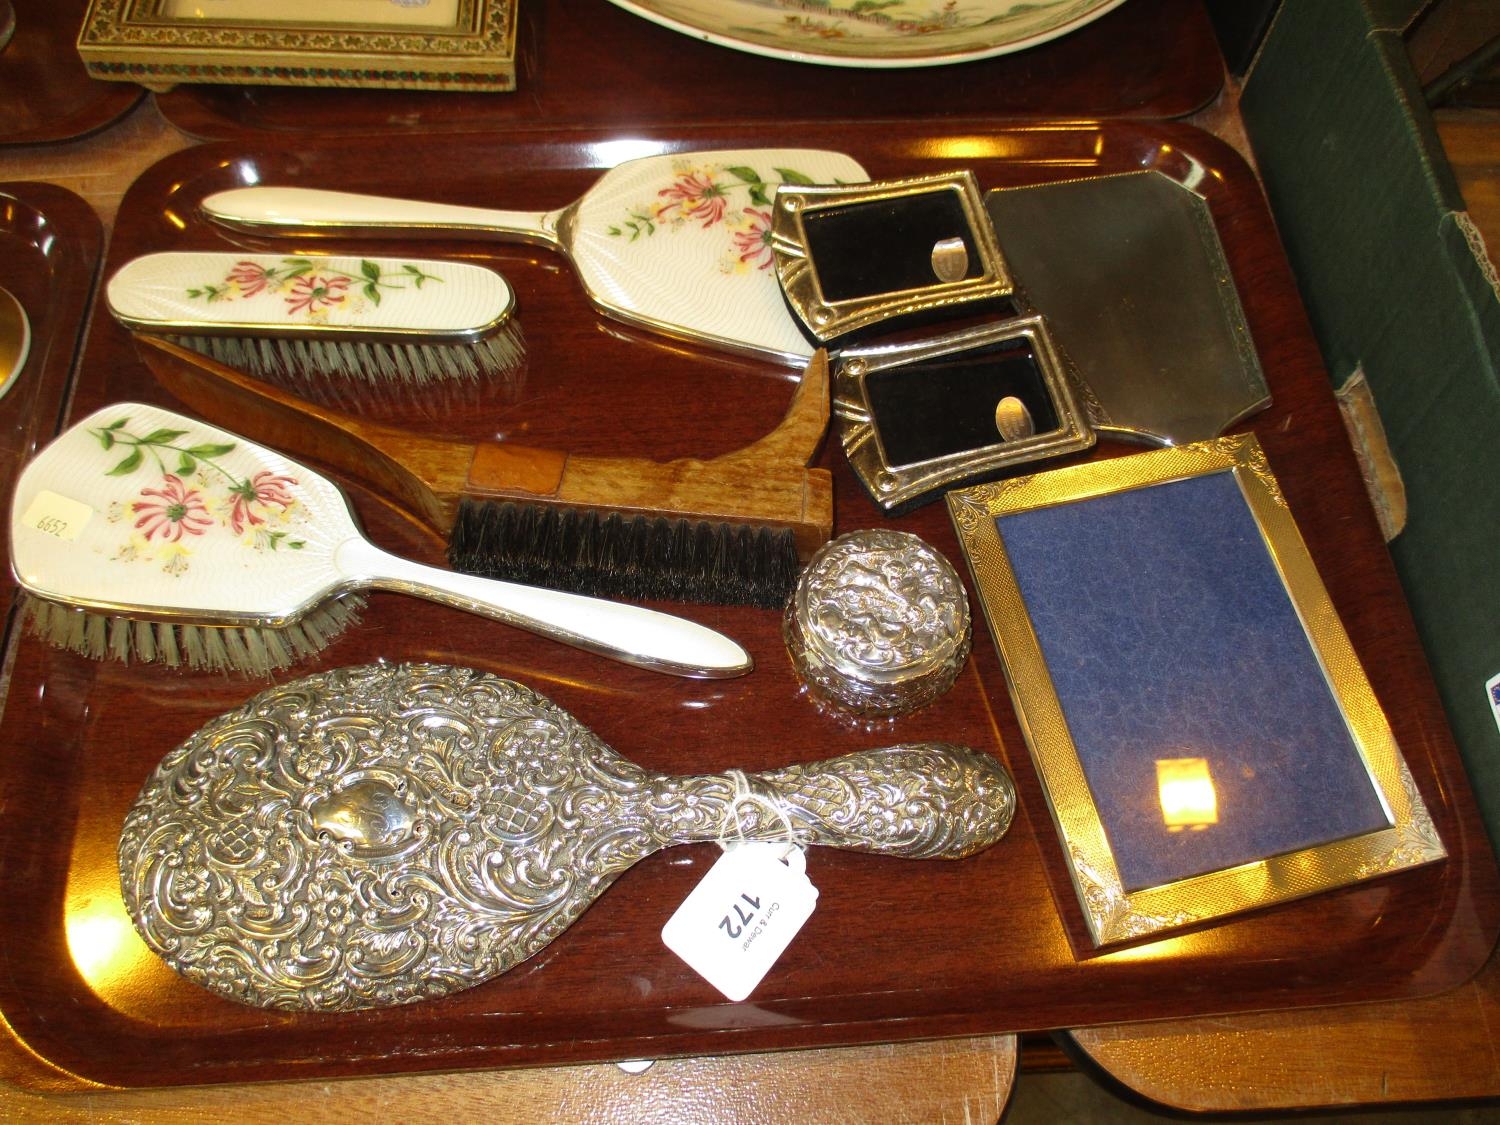 Two Silver Back Hand Mirrors, Silver Top Trinket Box and 3 Silver Figures along with 3 Brushes and a